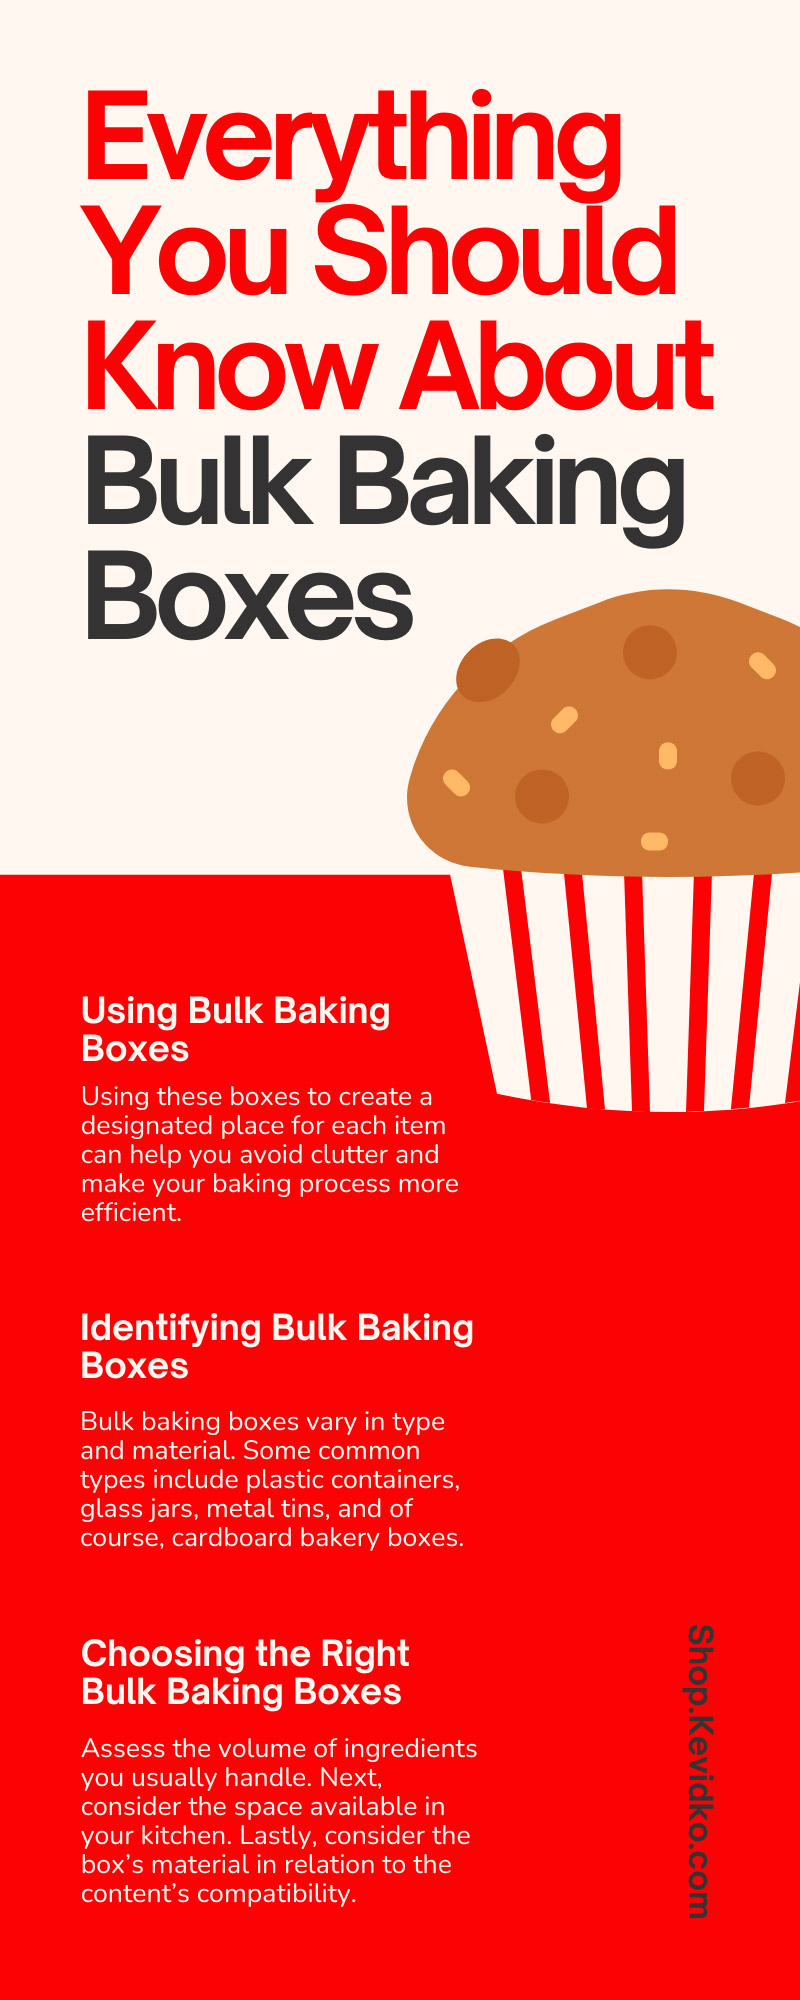 Everything You Should Know About Bulk Baking Boxes